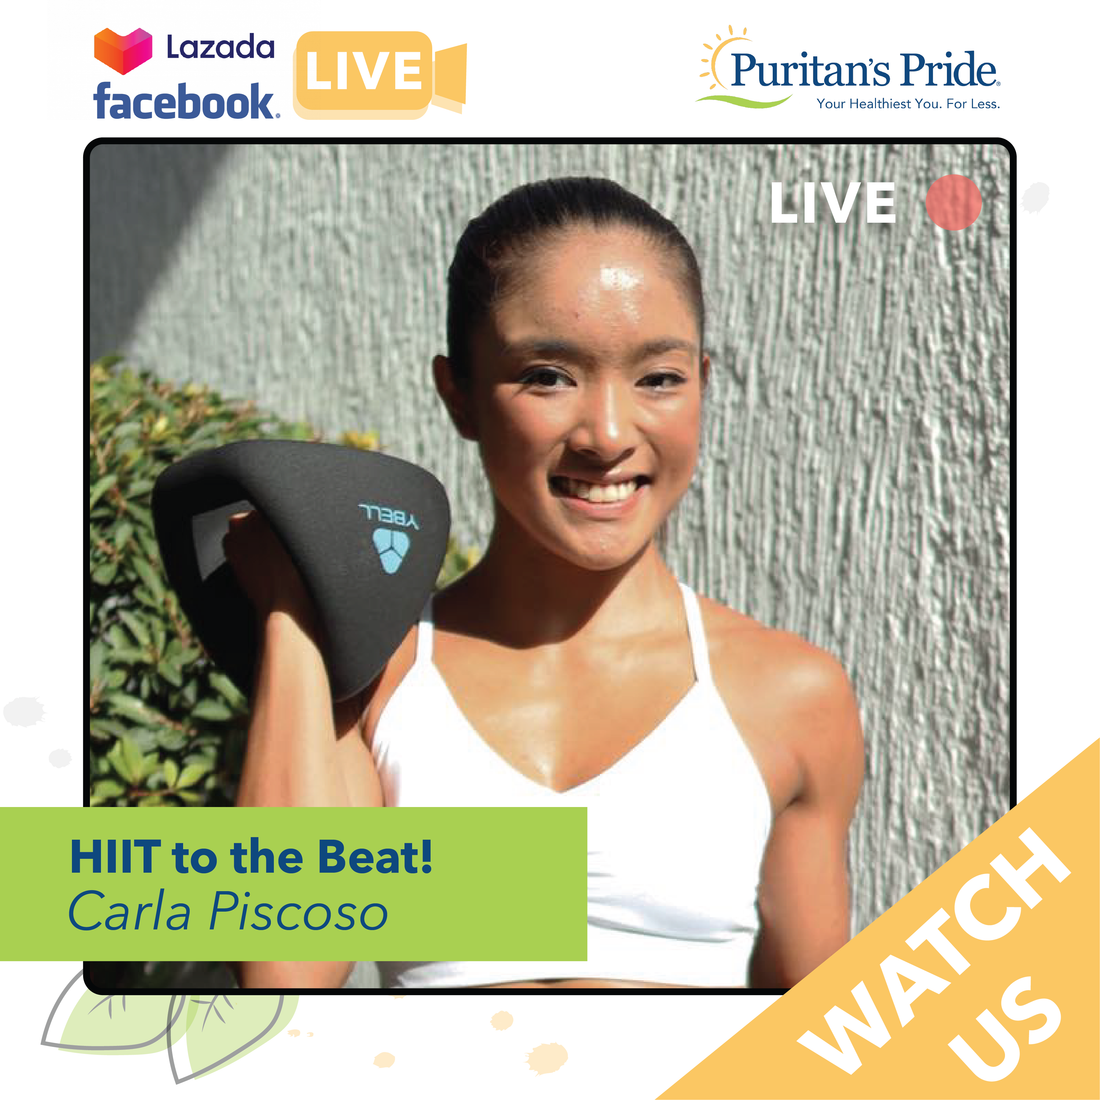 Workout Wednesday: HIIT to the Beat with Carla Piscoso!